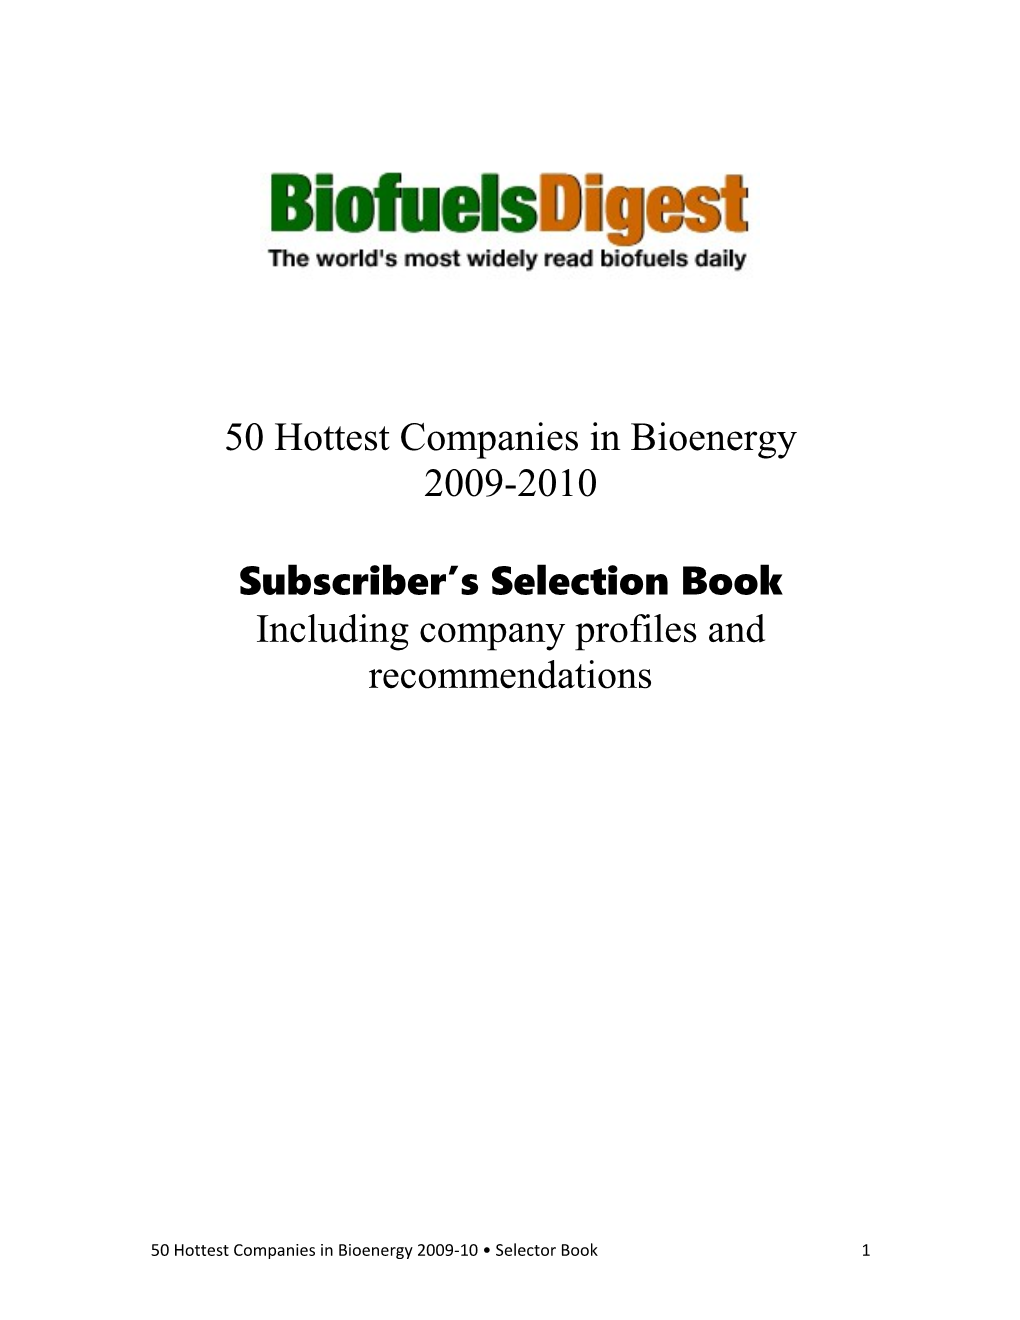 The 2009-10 50 Hottest Companies in Bioenergy